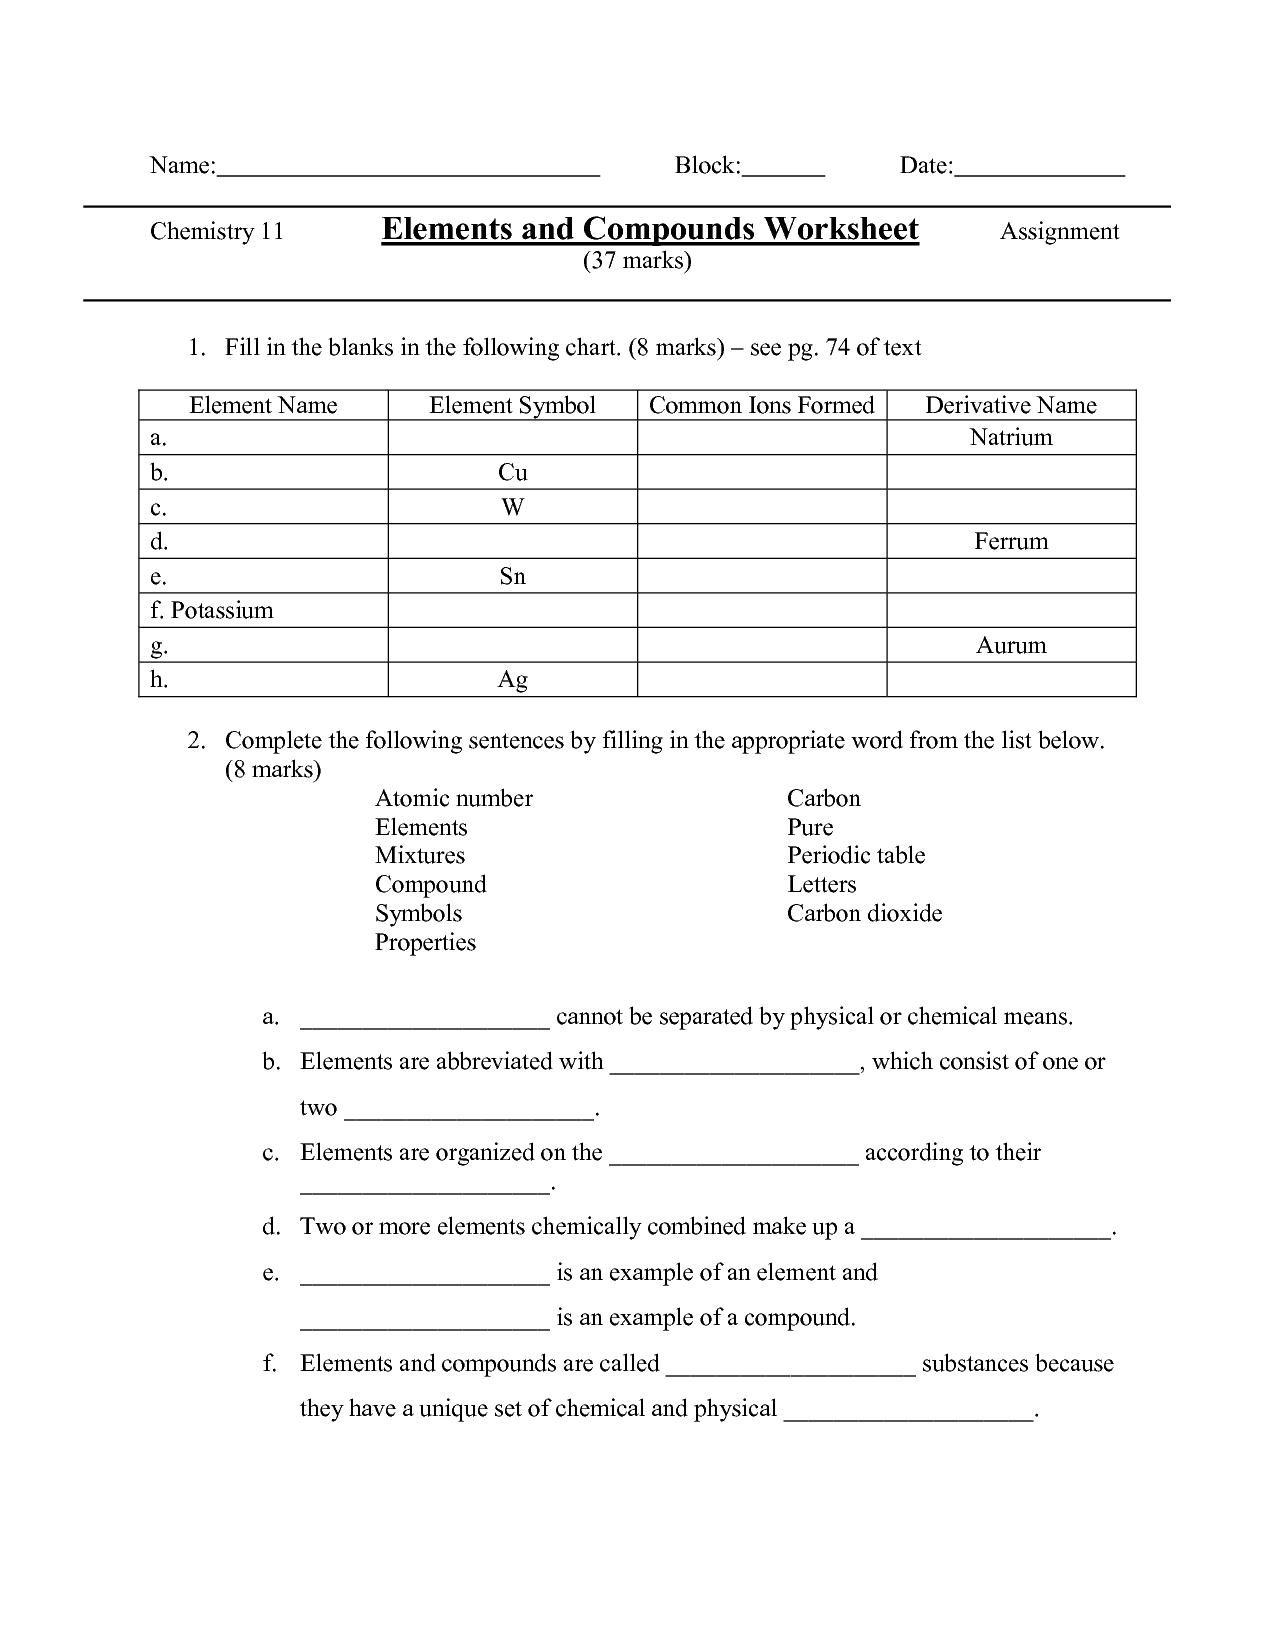 17-best-images-of-elements-compounds-and-mixtures-worksheet-element